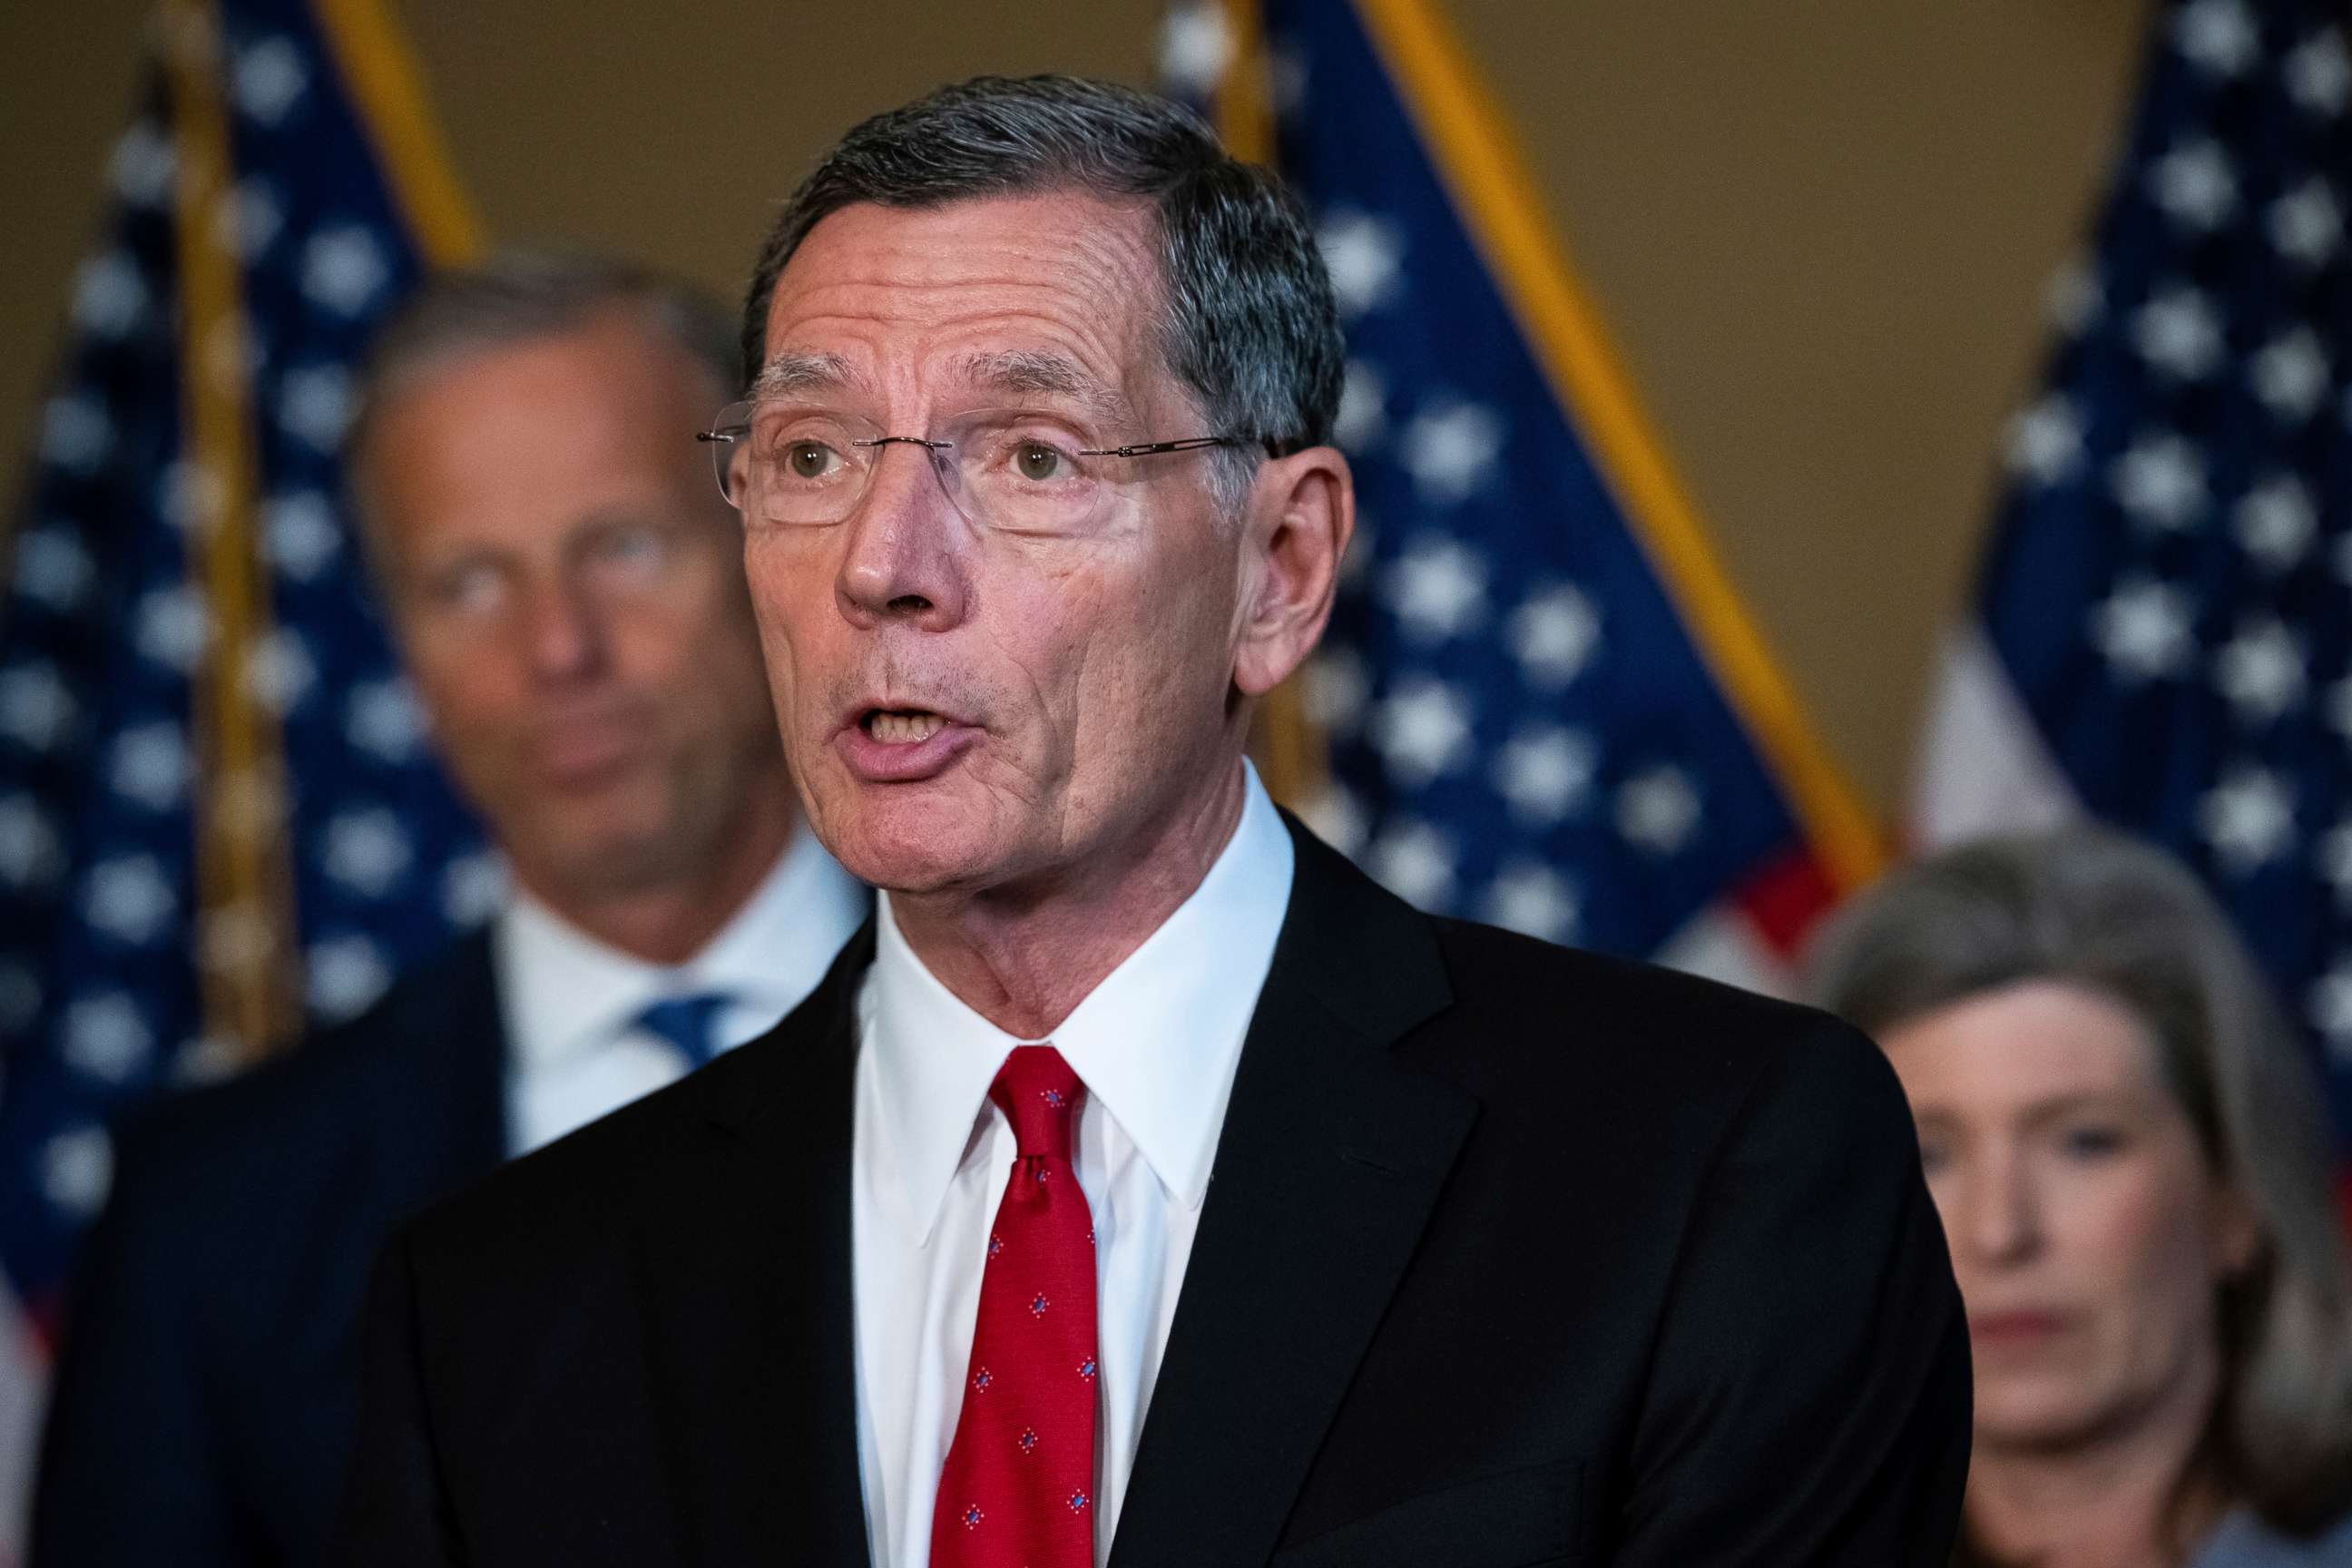 PHOTO: Sen. John Barrasso speaks to media during the weekly Senate Republican Leadership press conference, at the U.S. Capitol in Washington, D.C., Sept. 13, 2022.